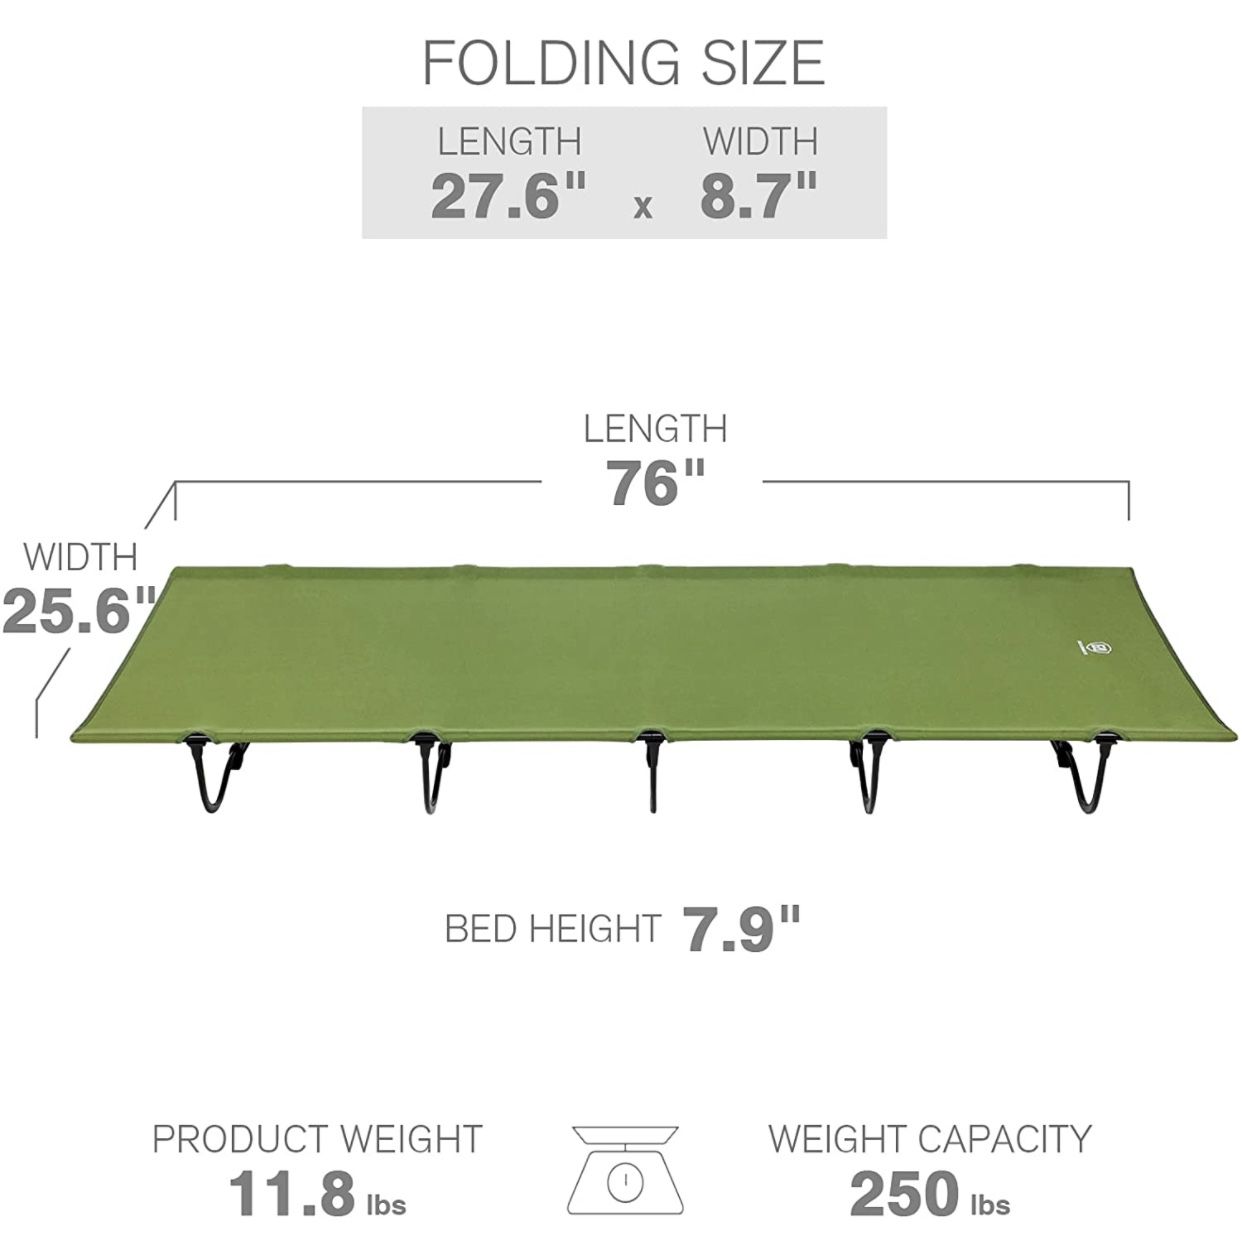 EVER ADVANCED Compact Camping Cot for Sleeping, Fishing, Outdoor Travel, Folding Portable Bed with Carrying Bag Supports Up to 250lbs, Green